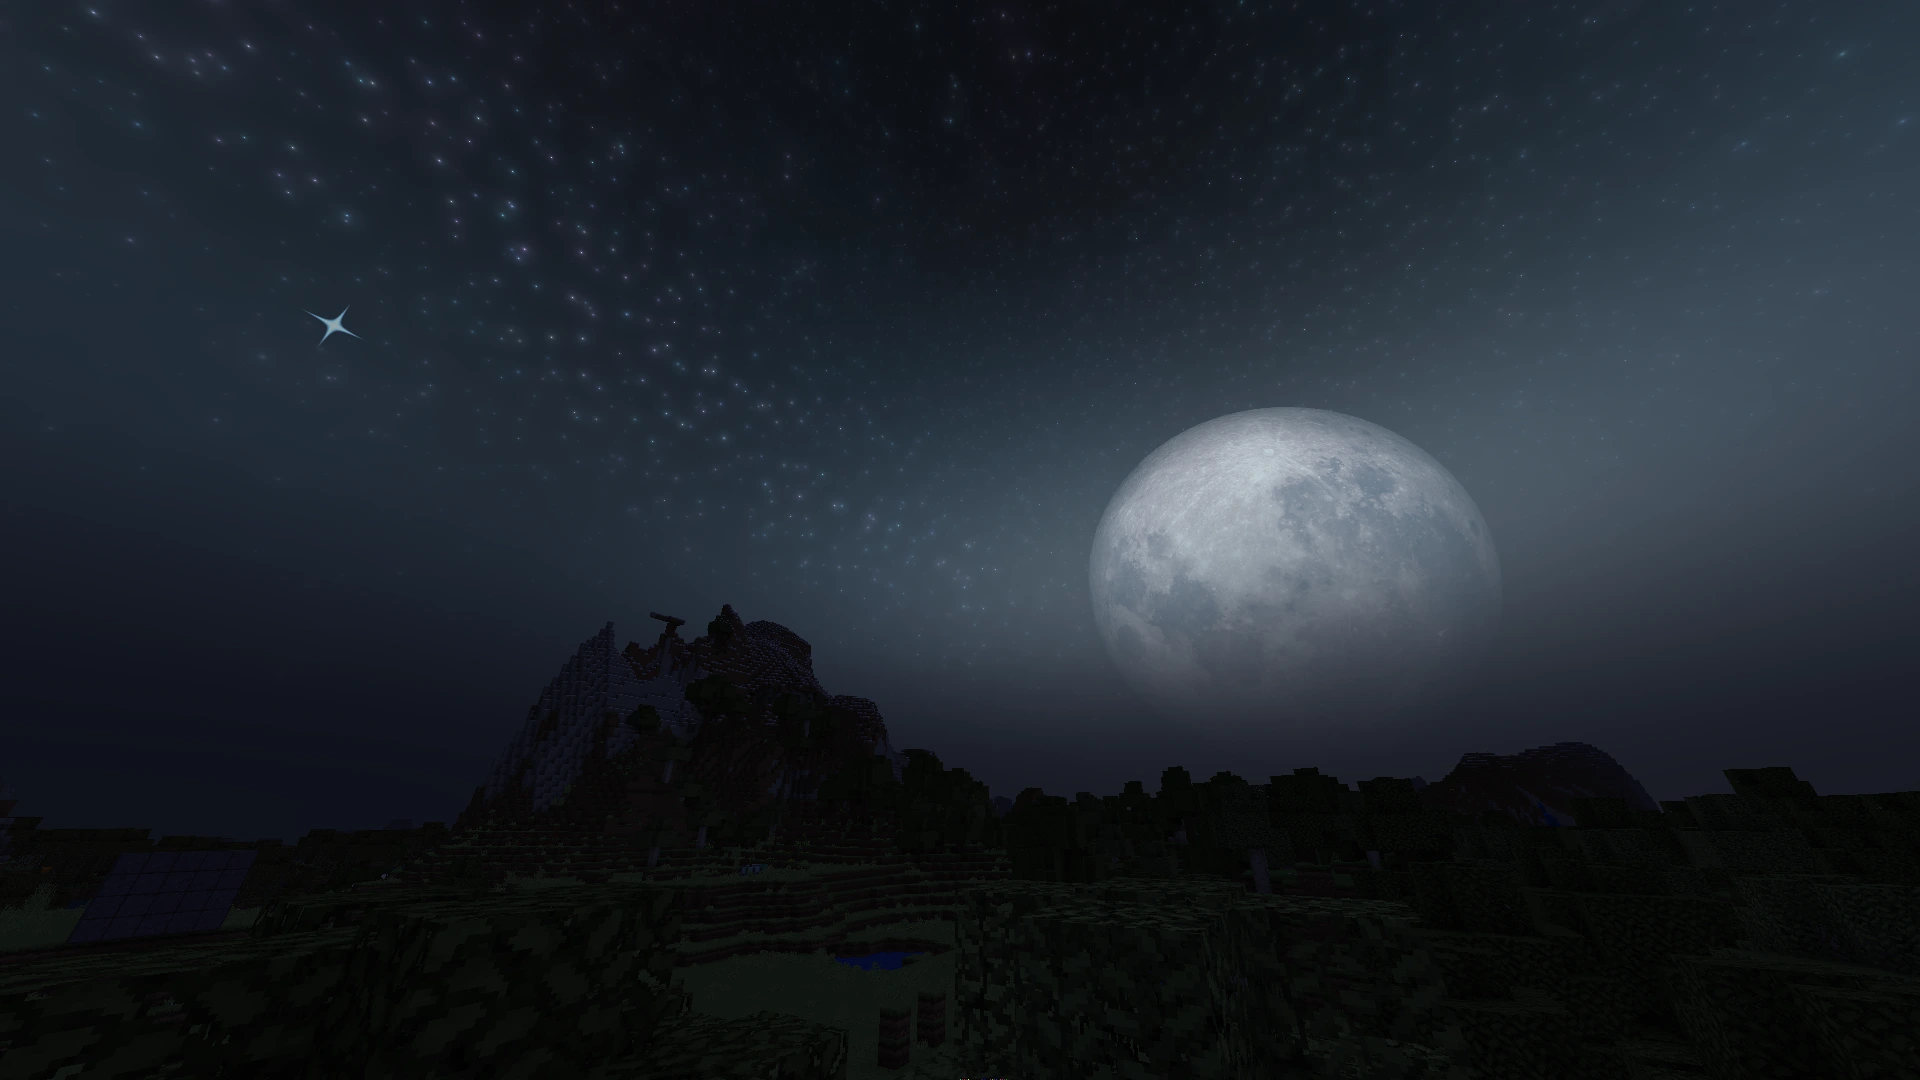 (No Optifine Needed)

Same as the Procedural Night Sky, but also changes the moon to be much bigger and adds a light layer of fog that is dynamically lit up by the moon based on where the moon is and what phase it's in.